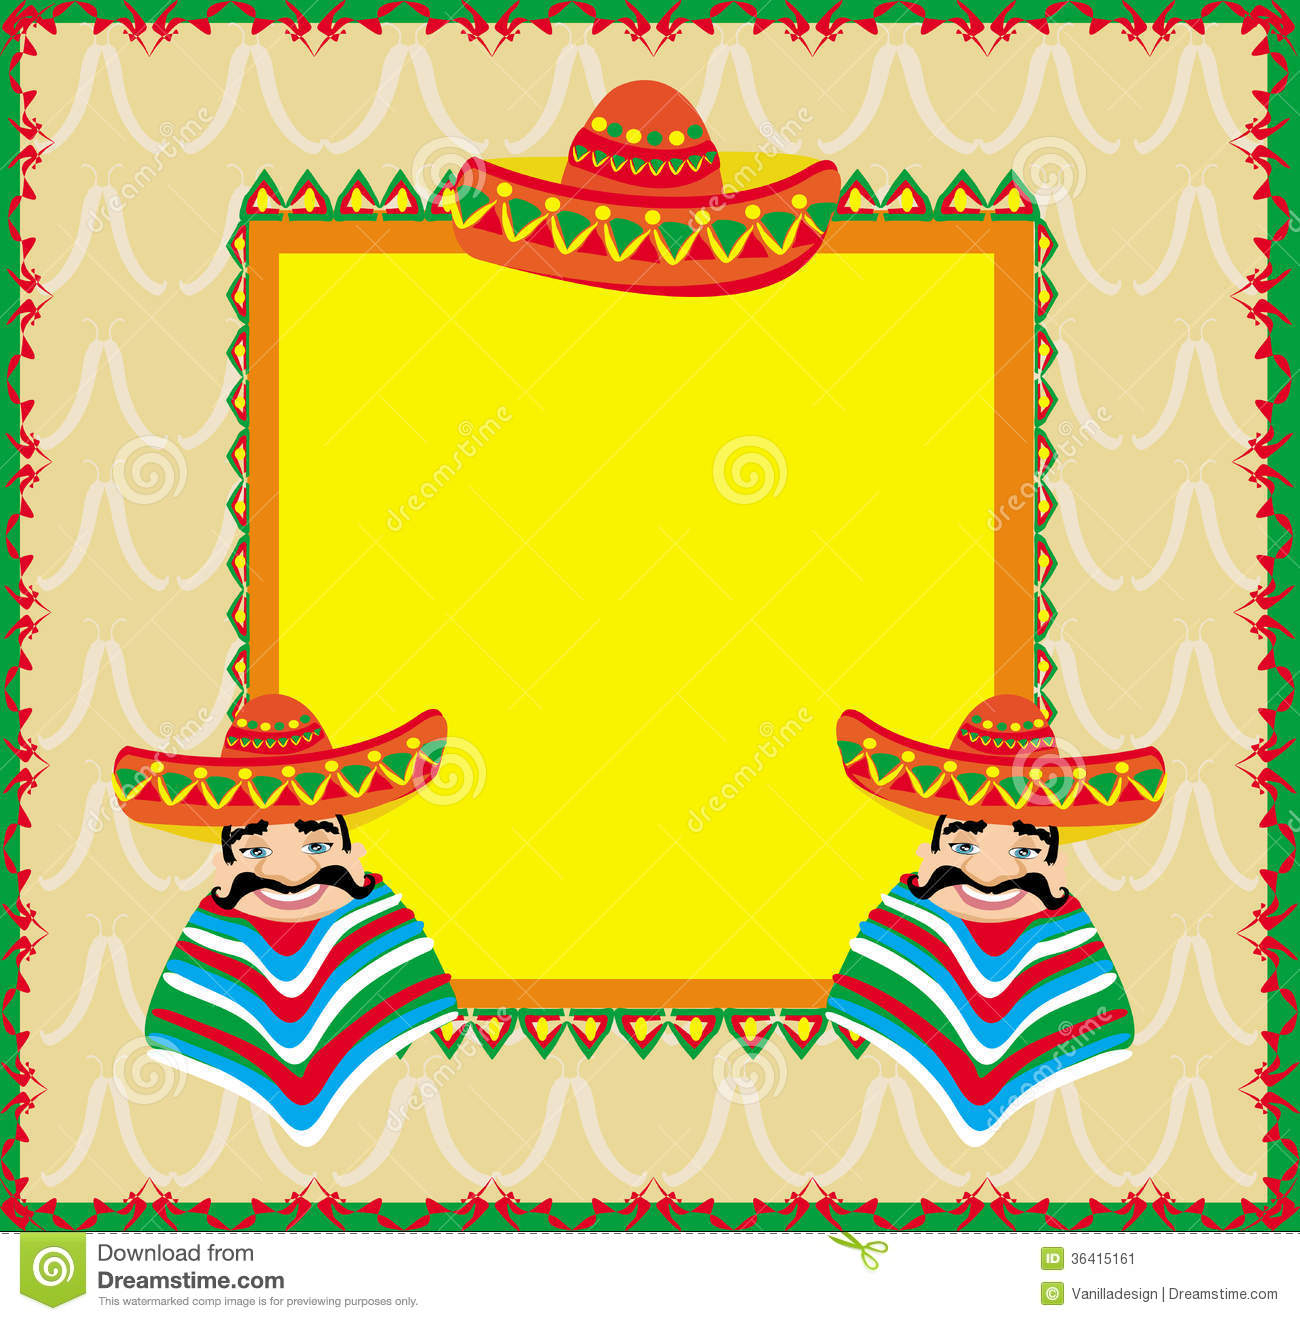 Mexican Frame With Man In Sombrero Stock Image   Image  36415161